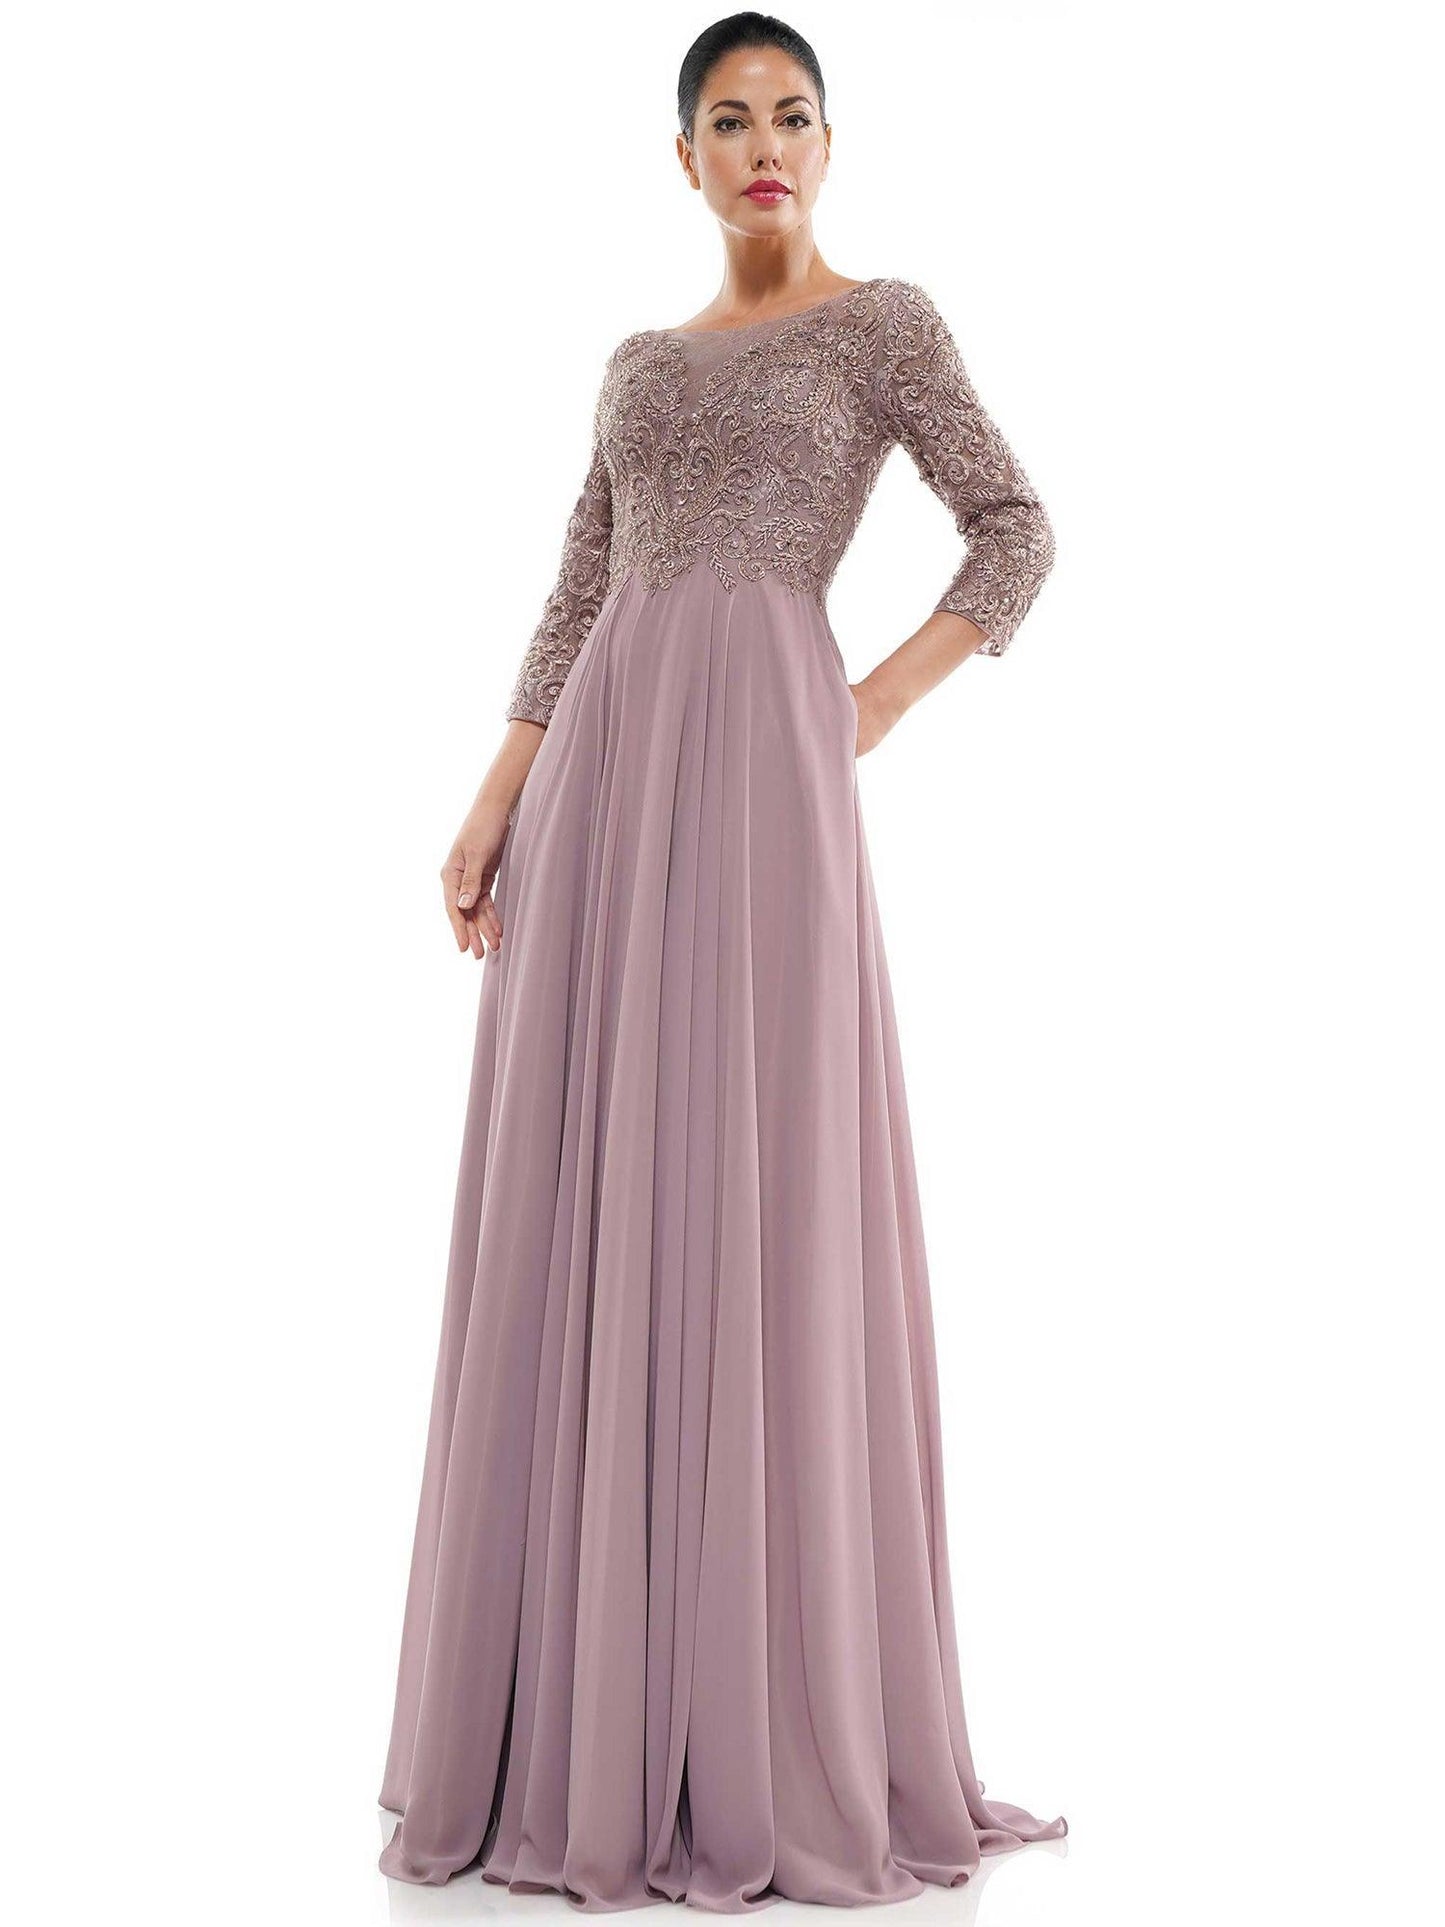 Marsoni Mother of the Bride A Line Long Dress Sale 1052 - The Dress Outlet